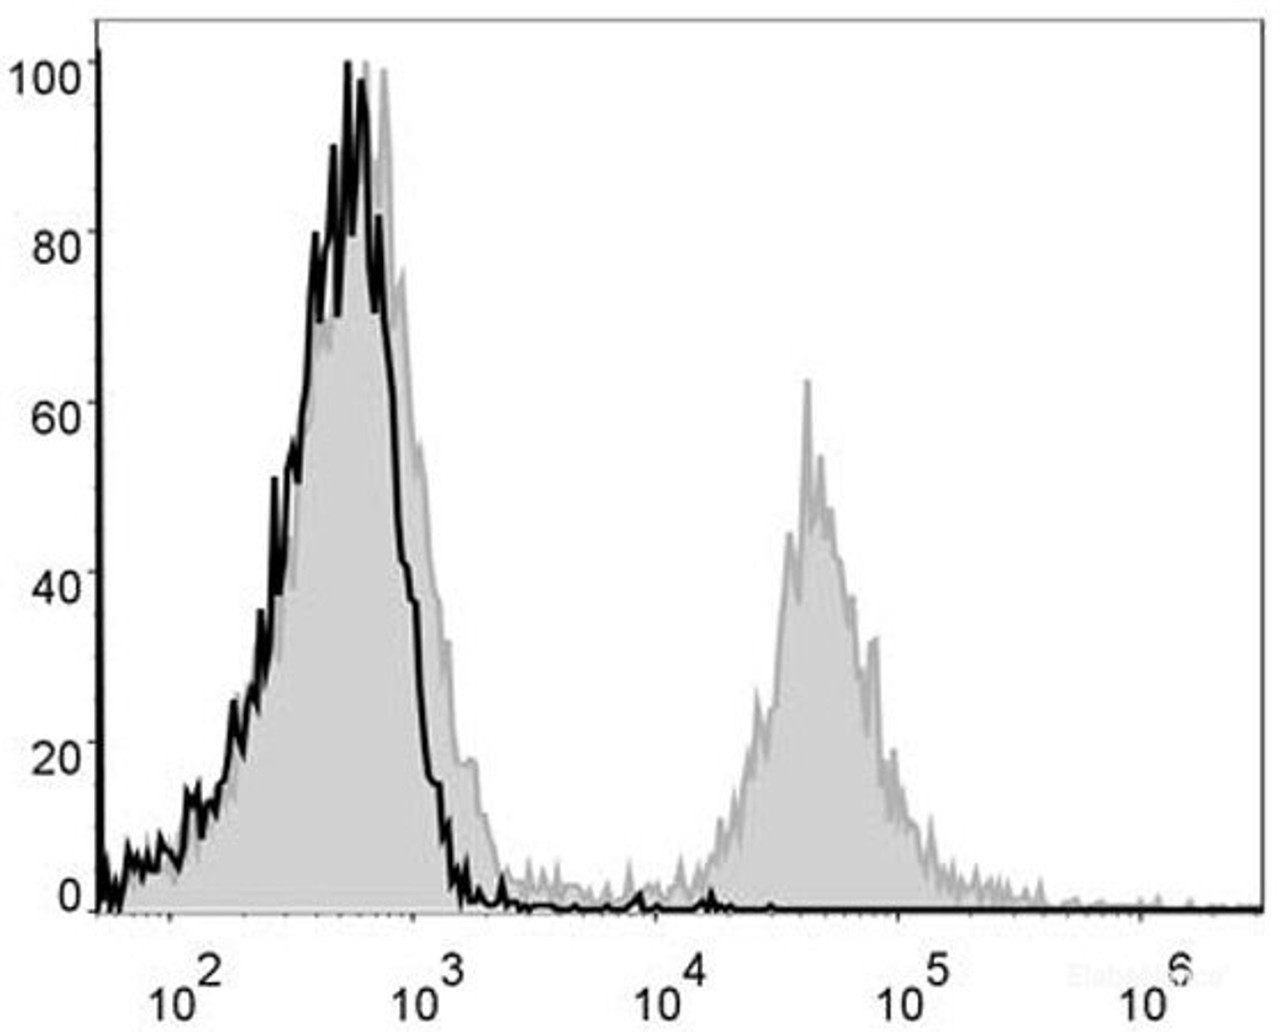 Mouse splenocytes are stained with PE Anti-Mouse CD4 Antibody[Used at .2 μg/1<sup>6</sup> cells dilution](filled gray histogram). Unstained splenocytes (blank black histogram) are used as control.